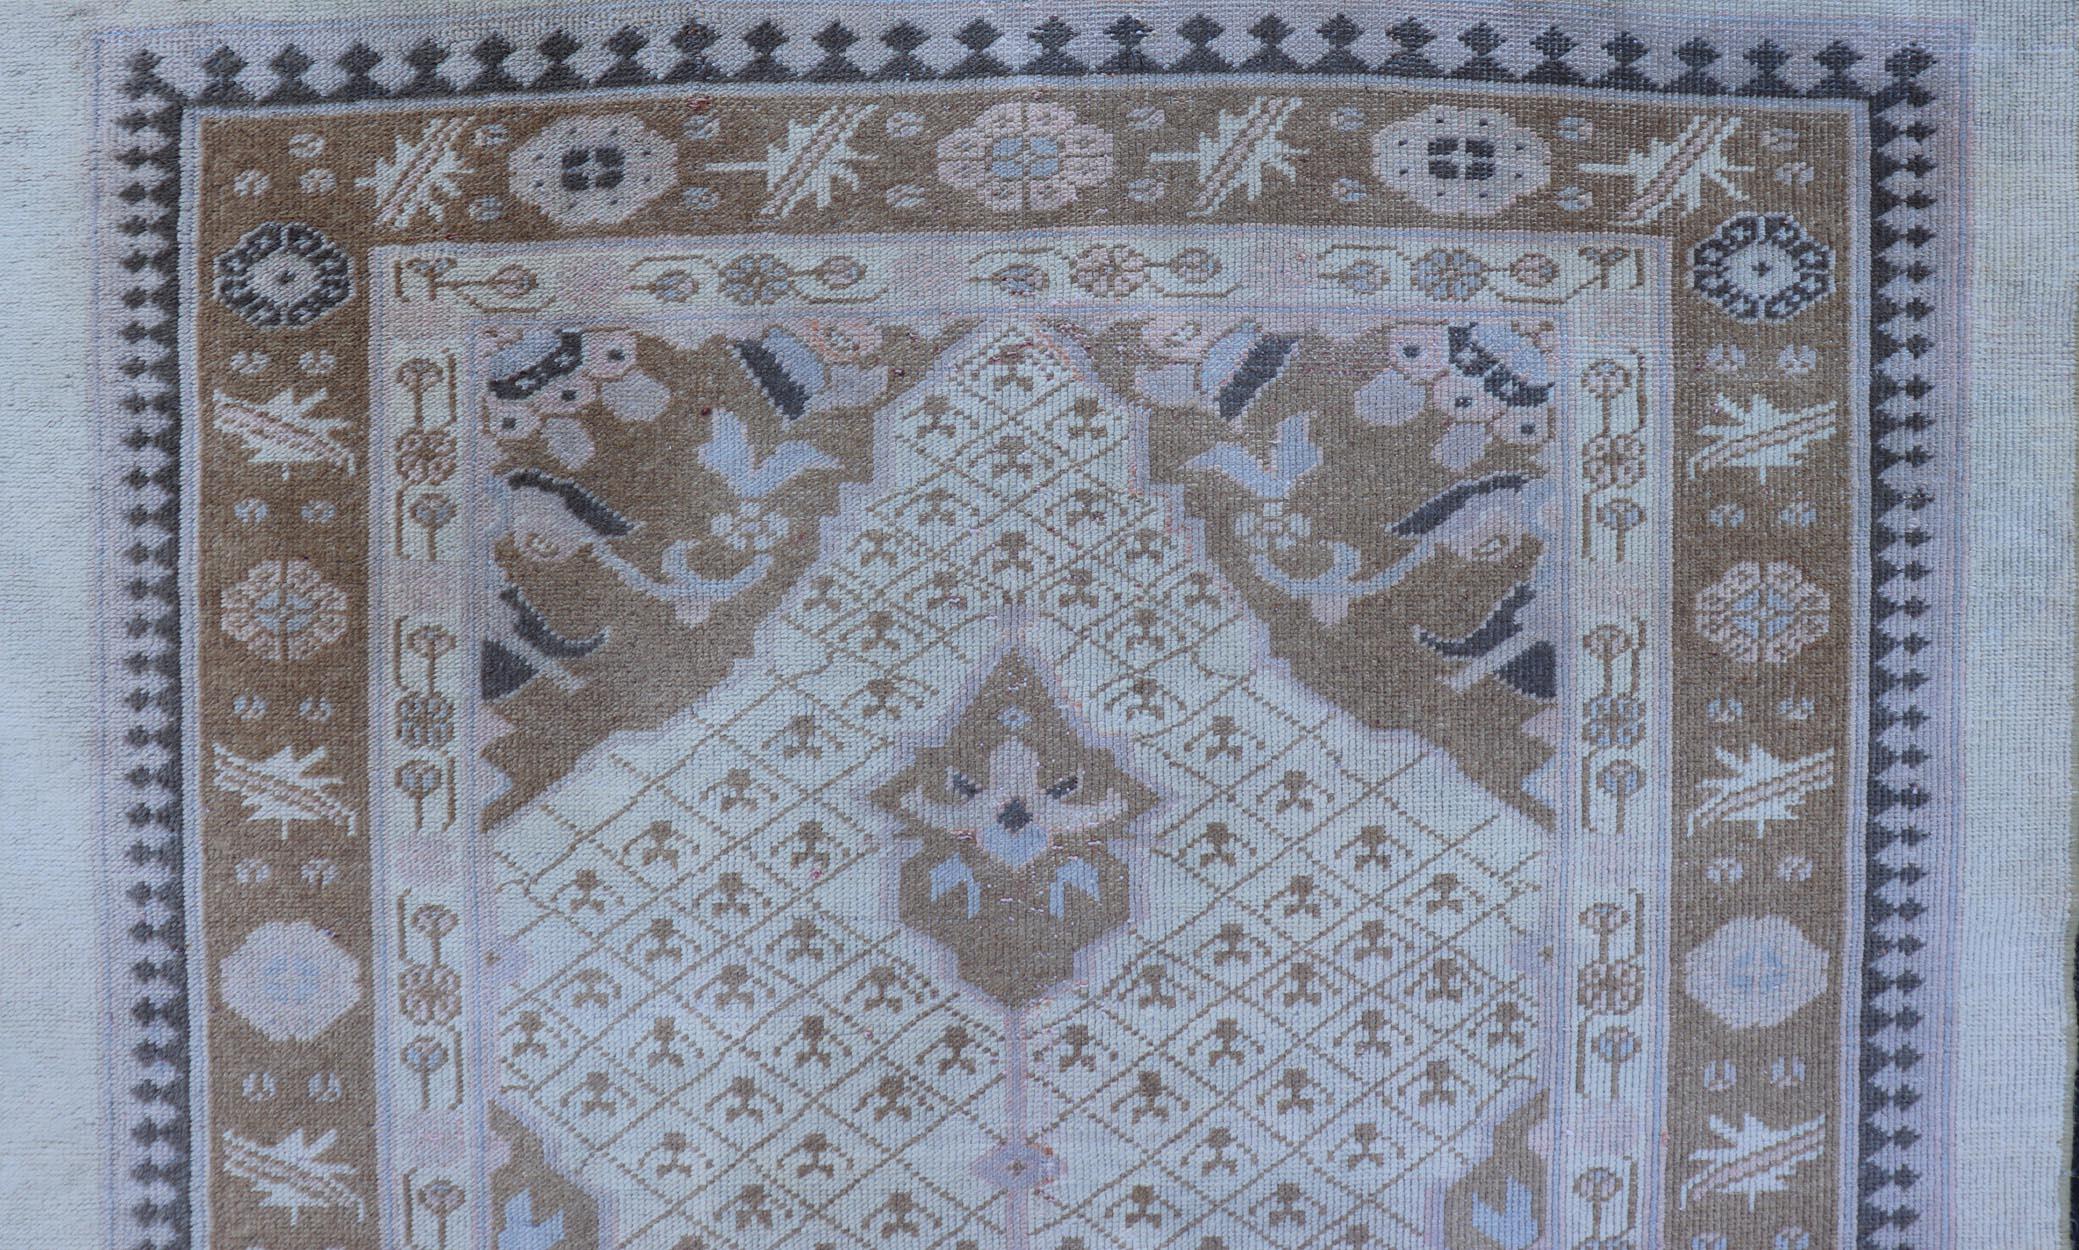 Antique Persian Serab, rug/21010. This beautiful Serab rug from the early 20th century rests on a camel background, which surrounds the medallion of alternating cream and brown colors. The main border has brown colors in a repeating geometric